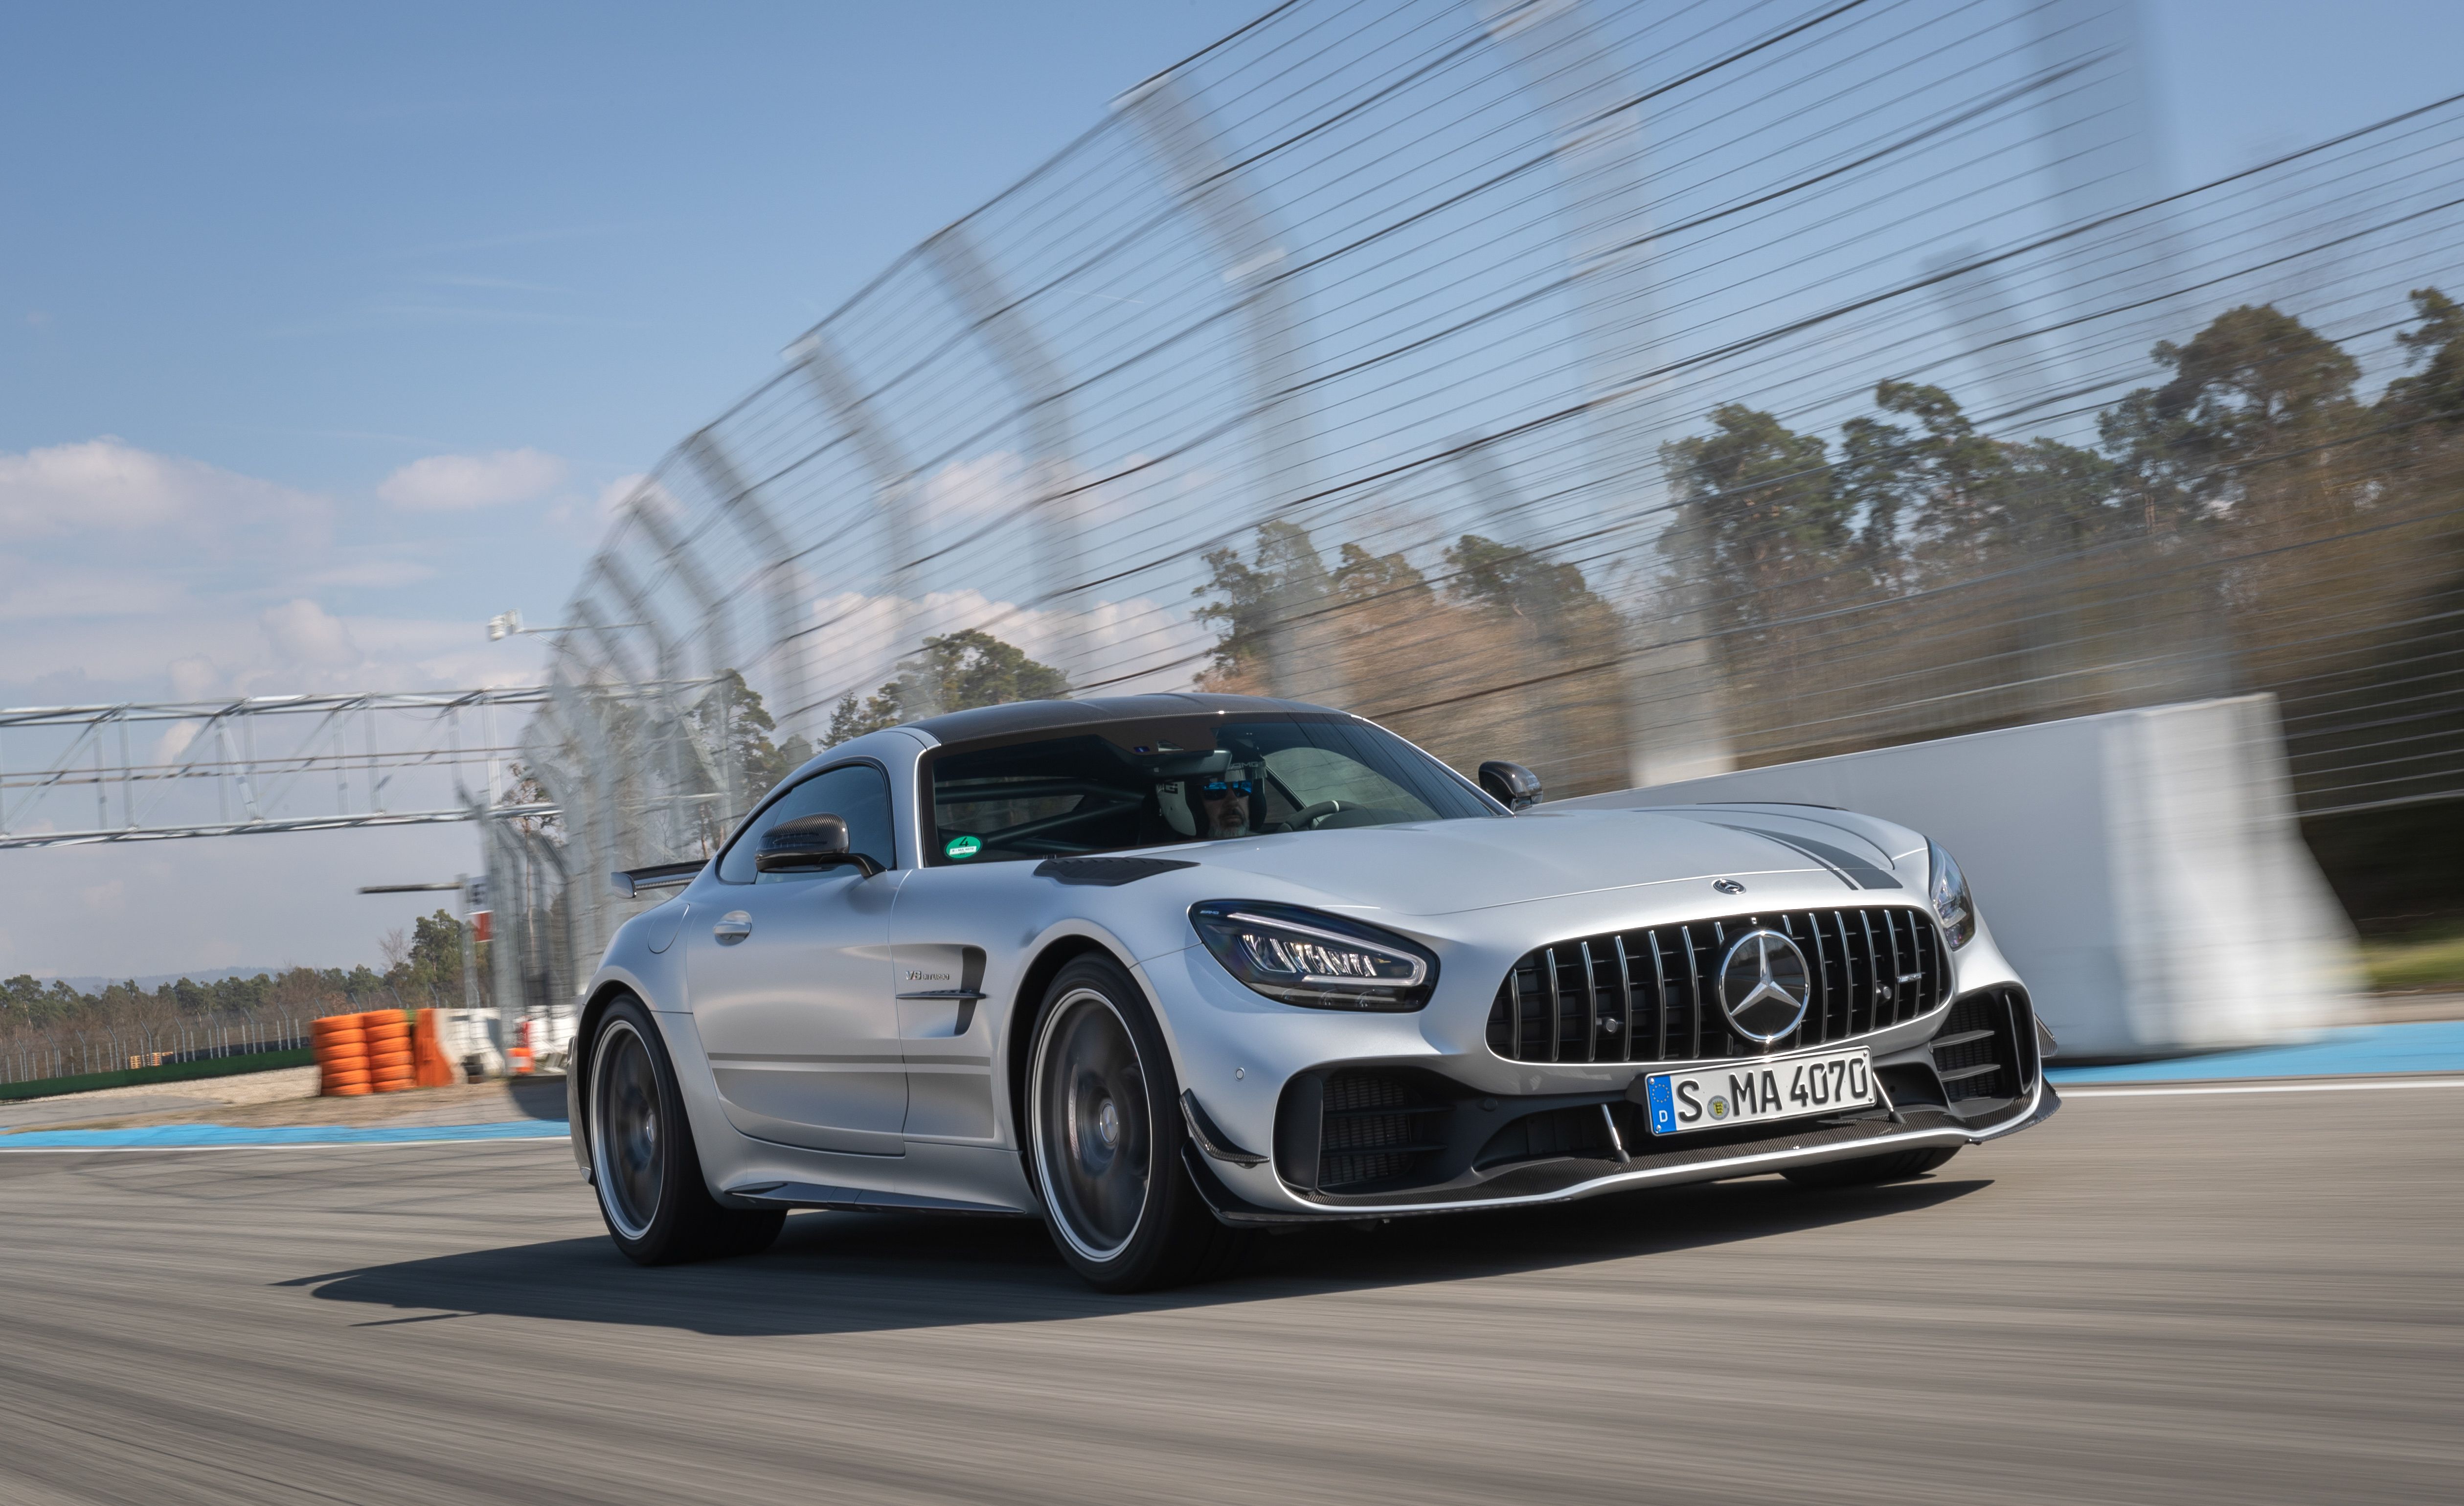 Mercedes-AMG GT 4-door Coupe starts at $136,500 with a V8 - CNET